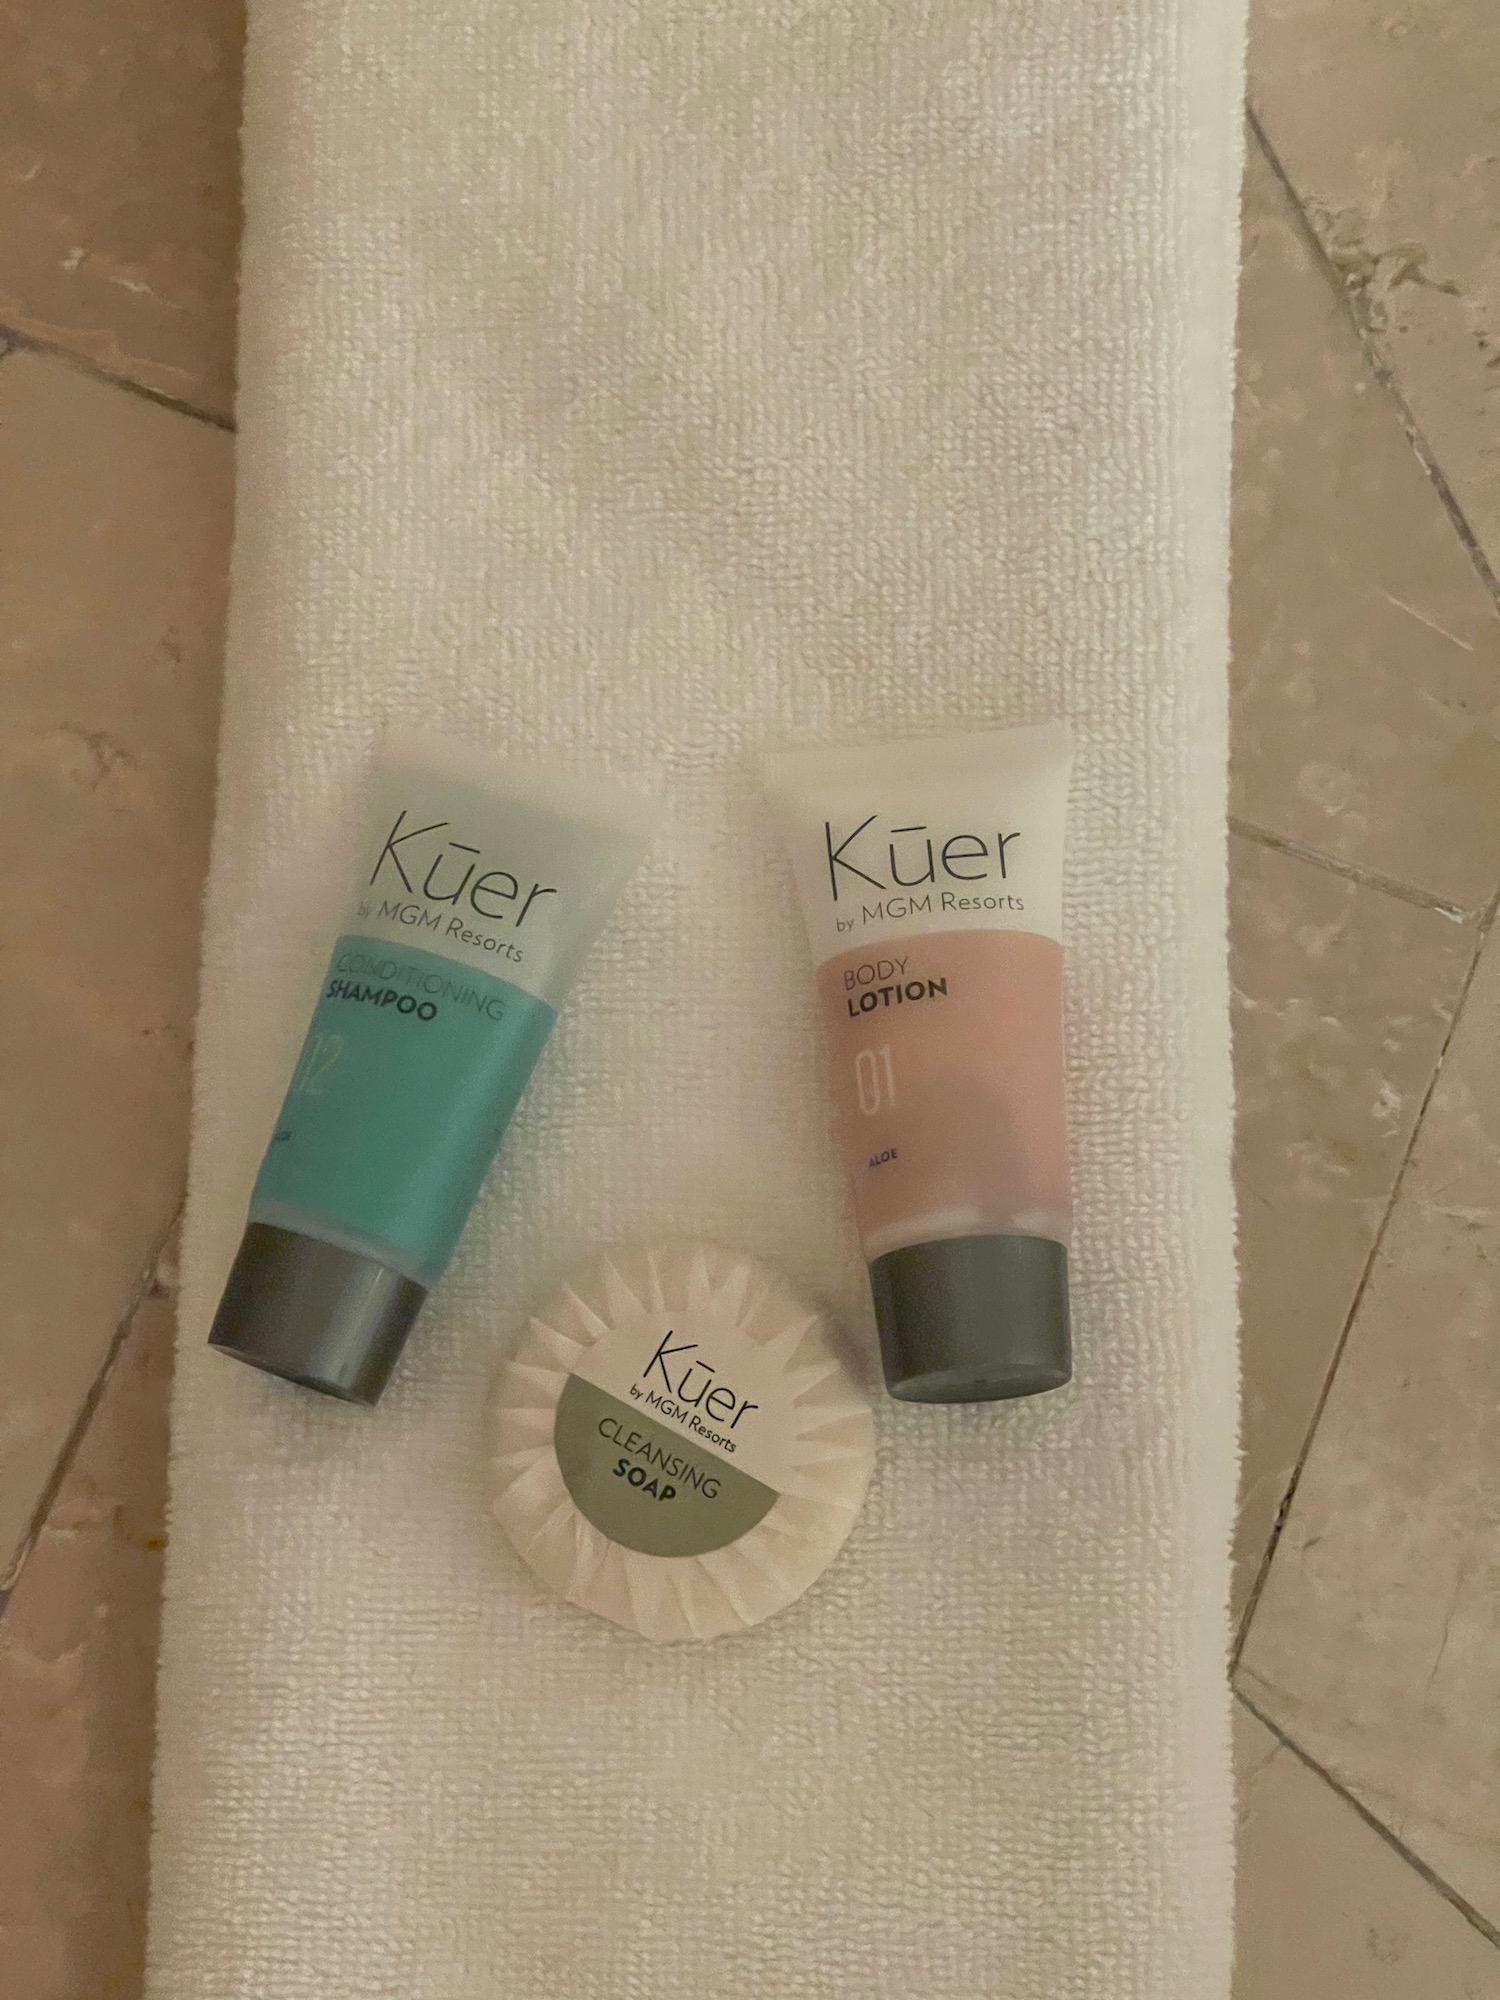 a group of small bottles of shampoo and soap on a towel